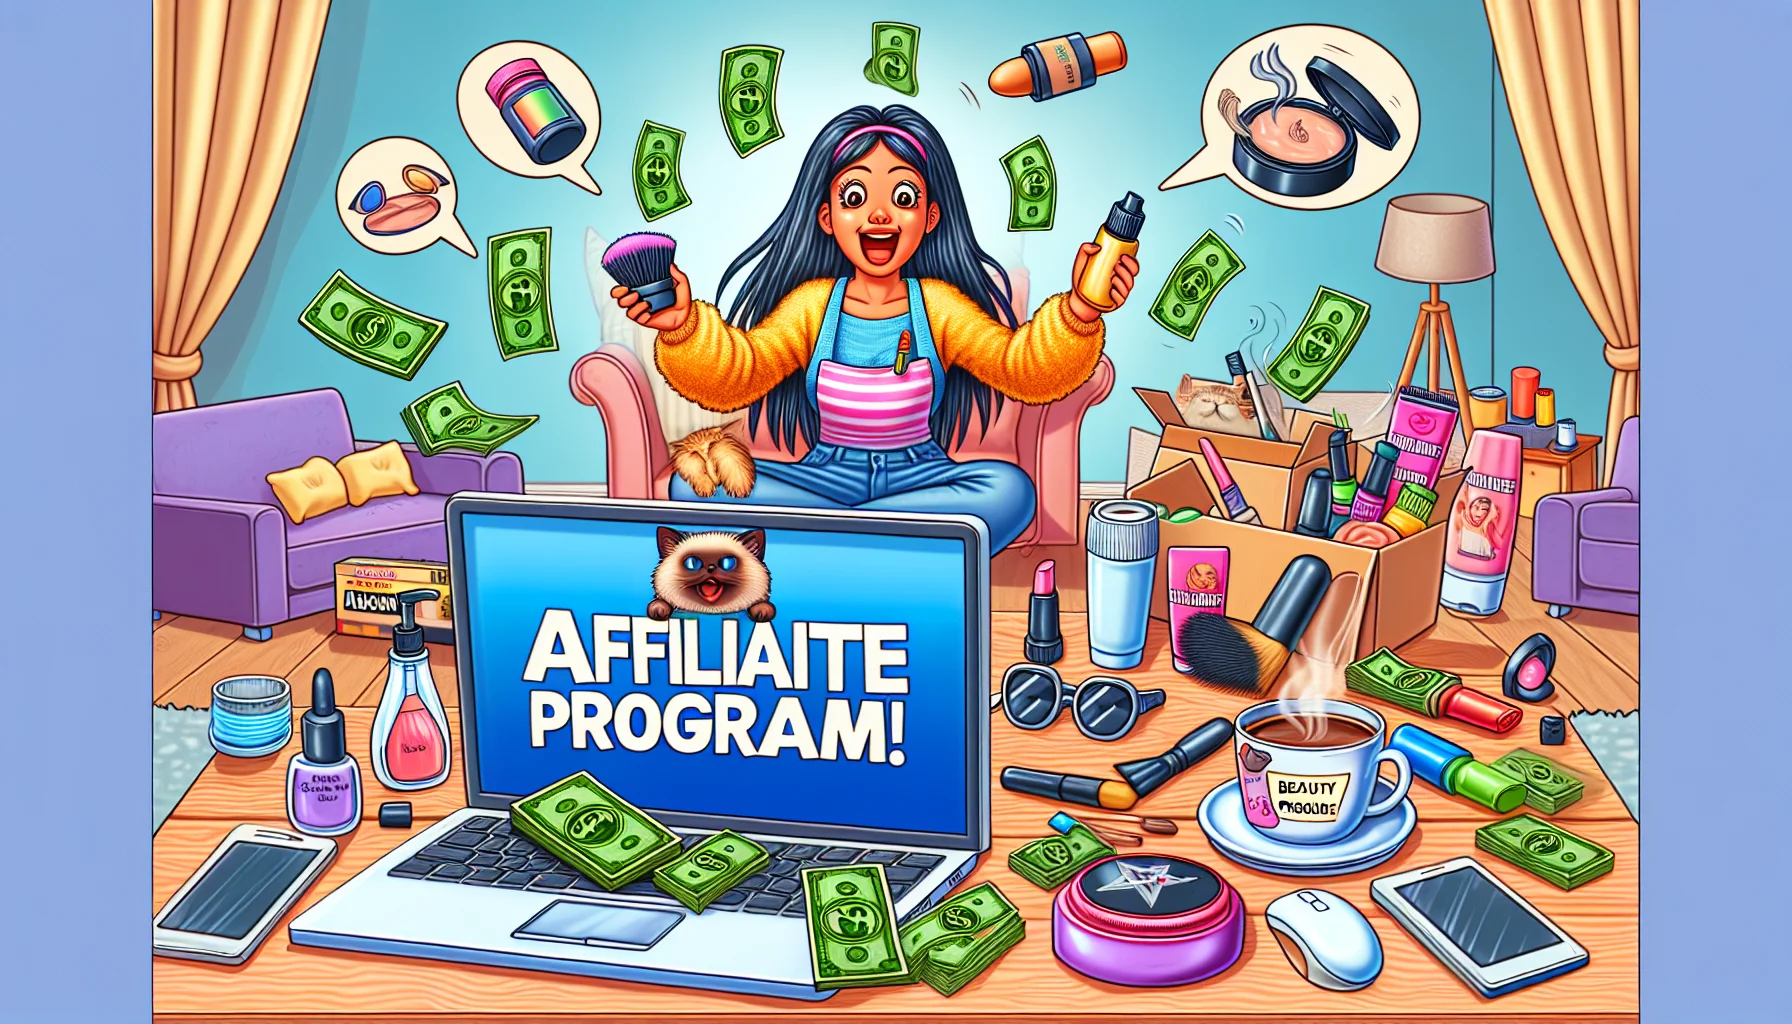 Imagine a humorous image depicting an affiliate marketing scenario. The main character is a female South Asian individual who is excitedly working on her laptop at home. On her screen, you can see the words 'Affiliate Program'. Surrounding the laptop are beauty products that are not brand-specific. There are also things typically related to an online entrepreneurial lifestyle such as a cup of coffee filled with dollar bills, a virtual currency symbol hovering over her head, and a cat snoozing in the background.